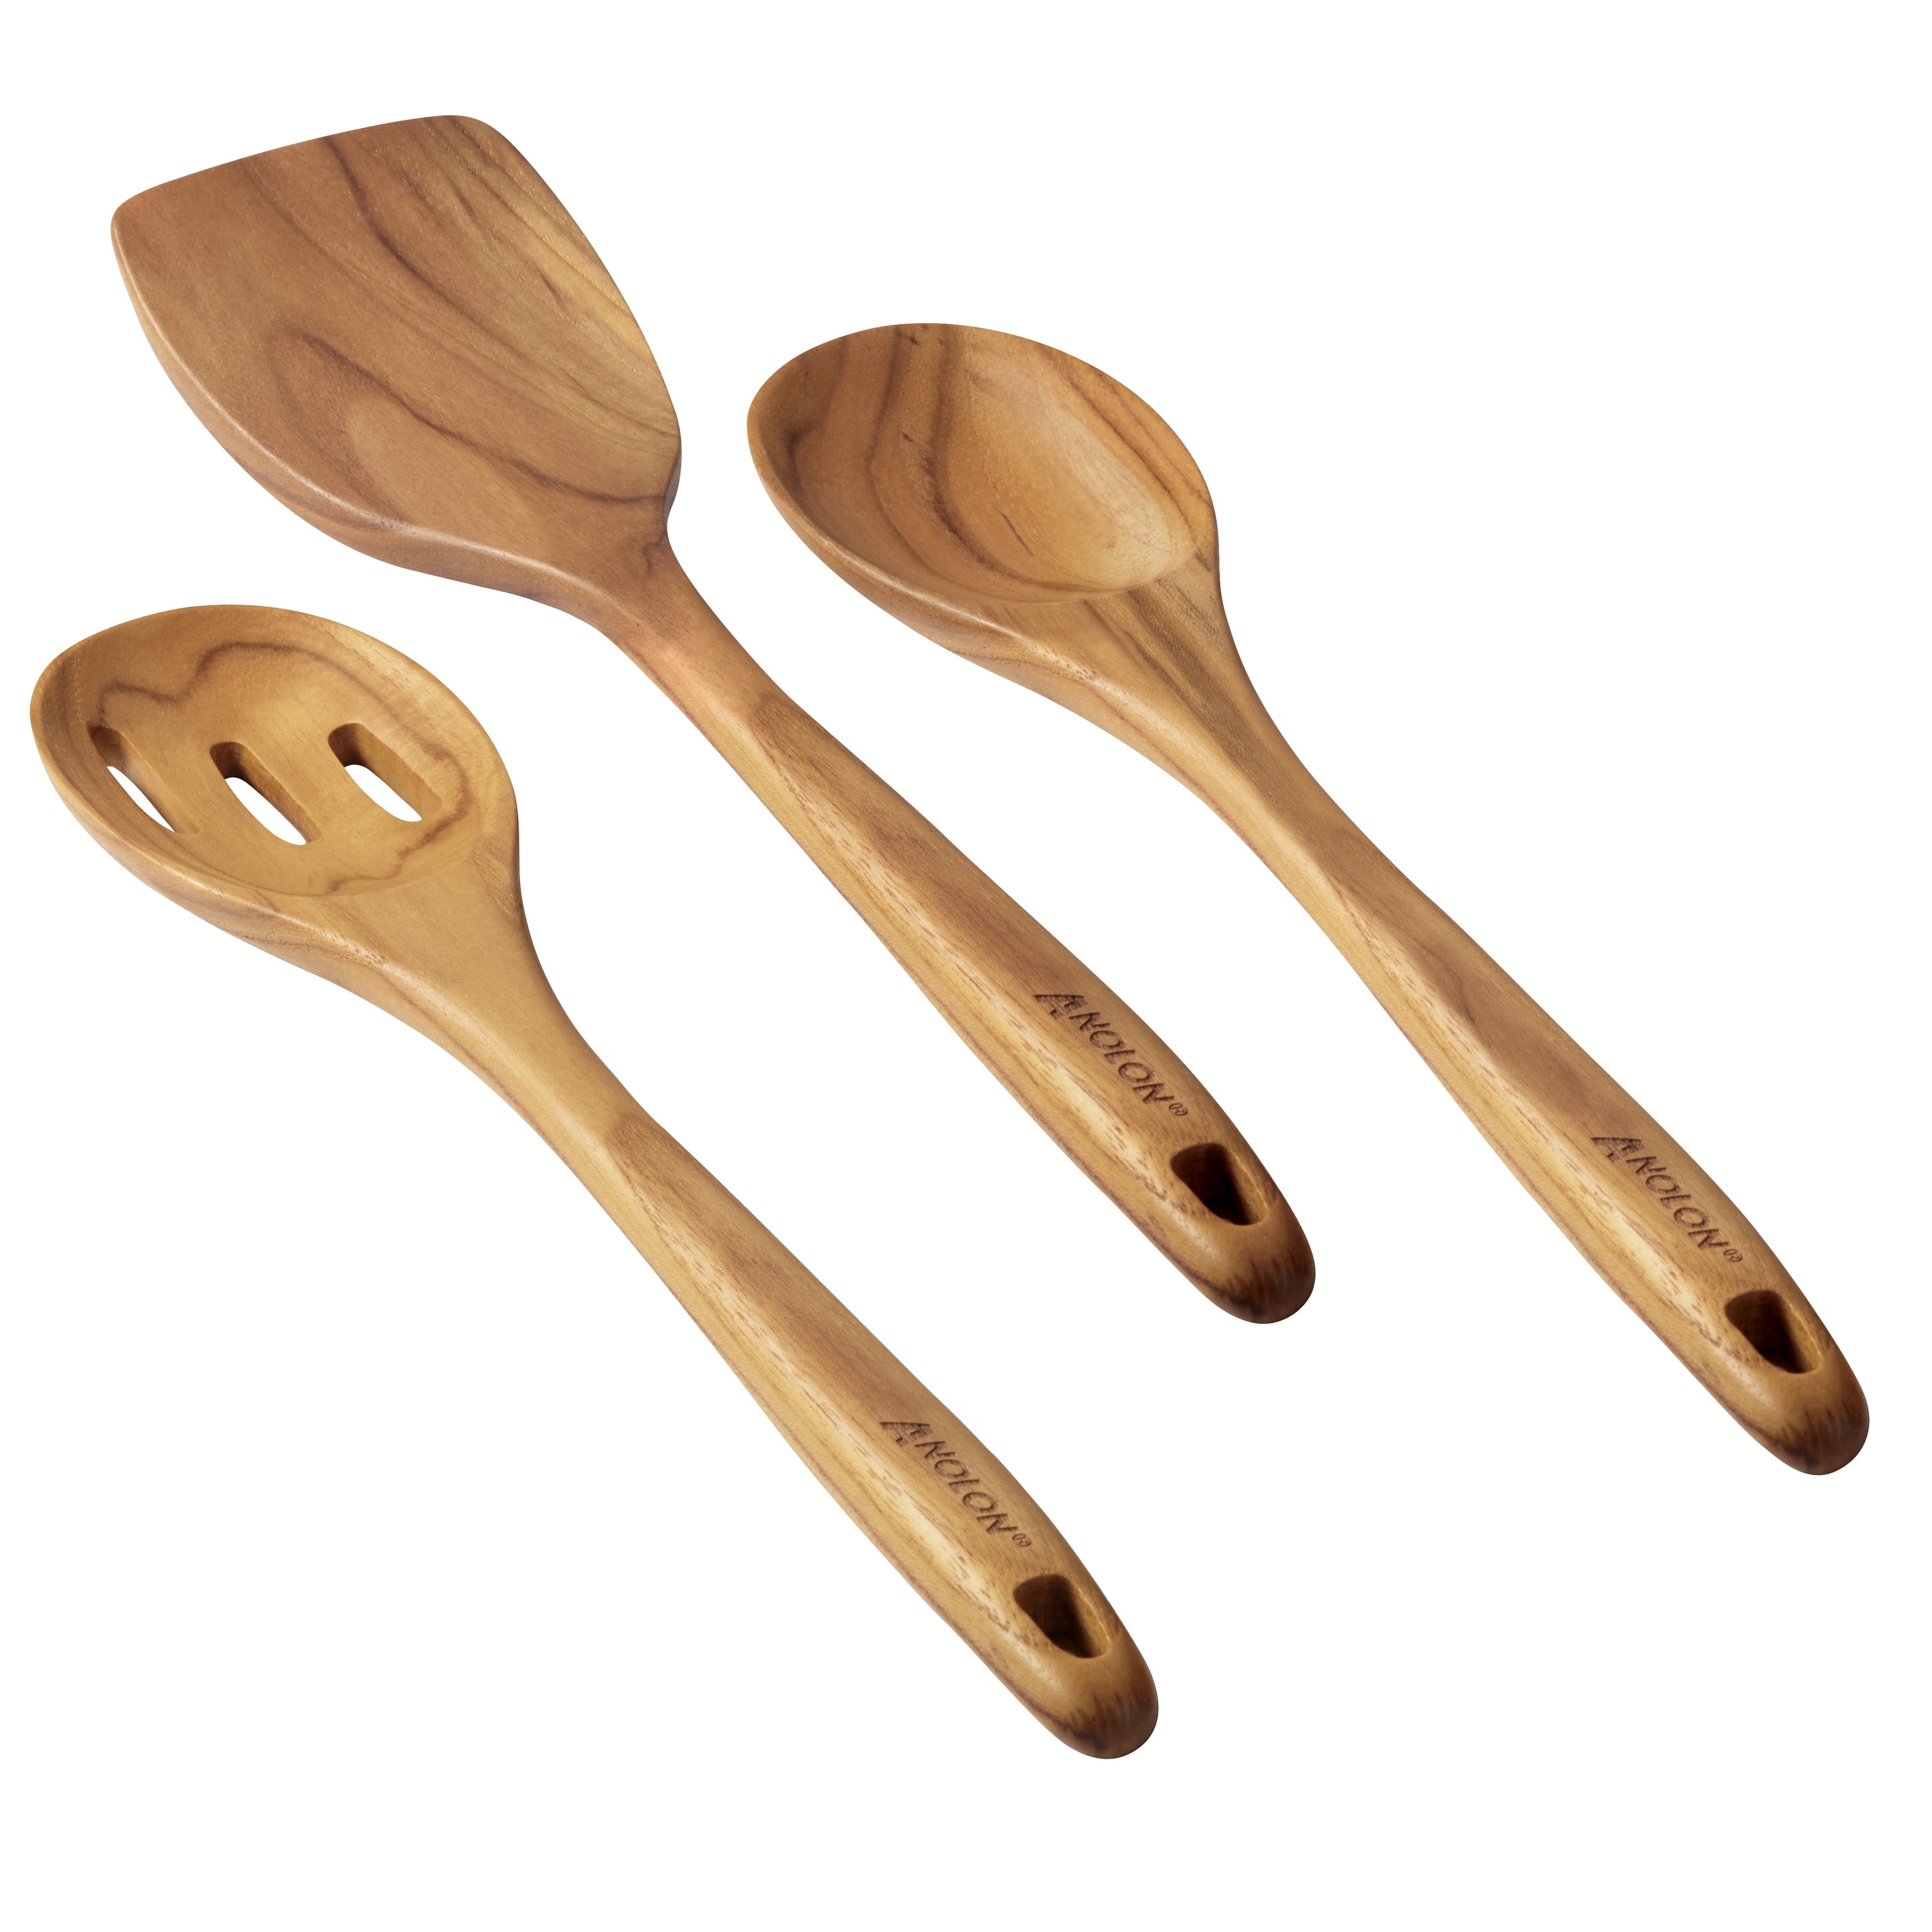 https://ak1.ostkcdn.com/images/products/is/images/direct/03be8ec64f81f1117c892621228e4d88cf68f83f/Anolon-Teak-Wood-Tools-13-Inch-Tool-Set%2C-3-Piece.jpg